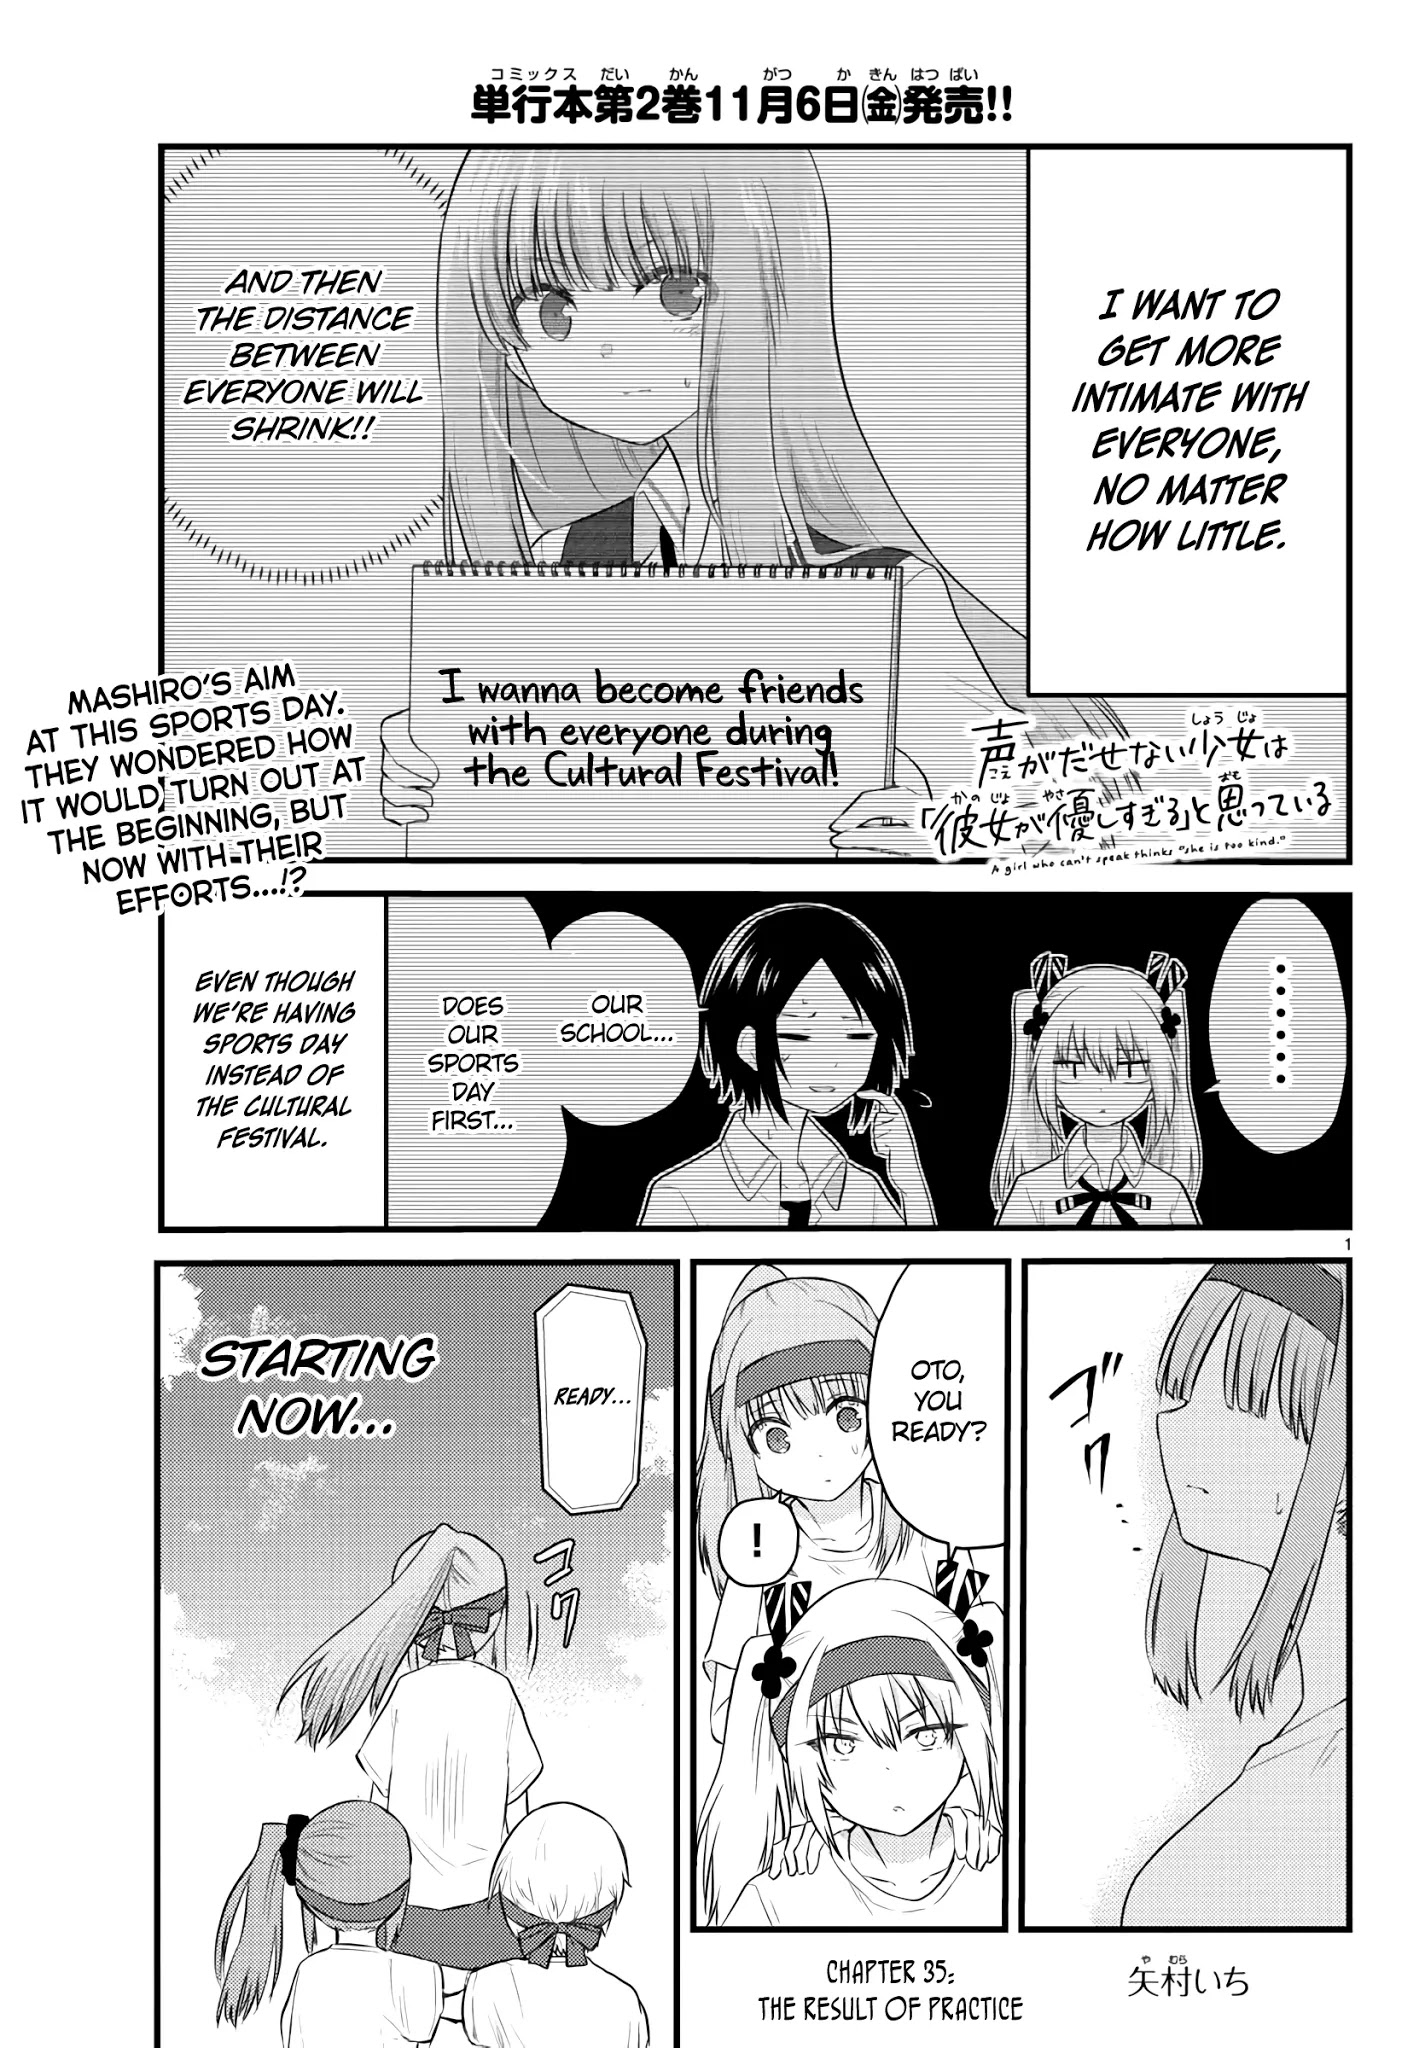 The Mute Girl And Her New Friend (Serialization) Chapter 35: The Result Of Practice - Picture 1